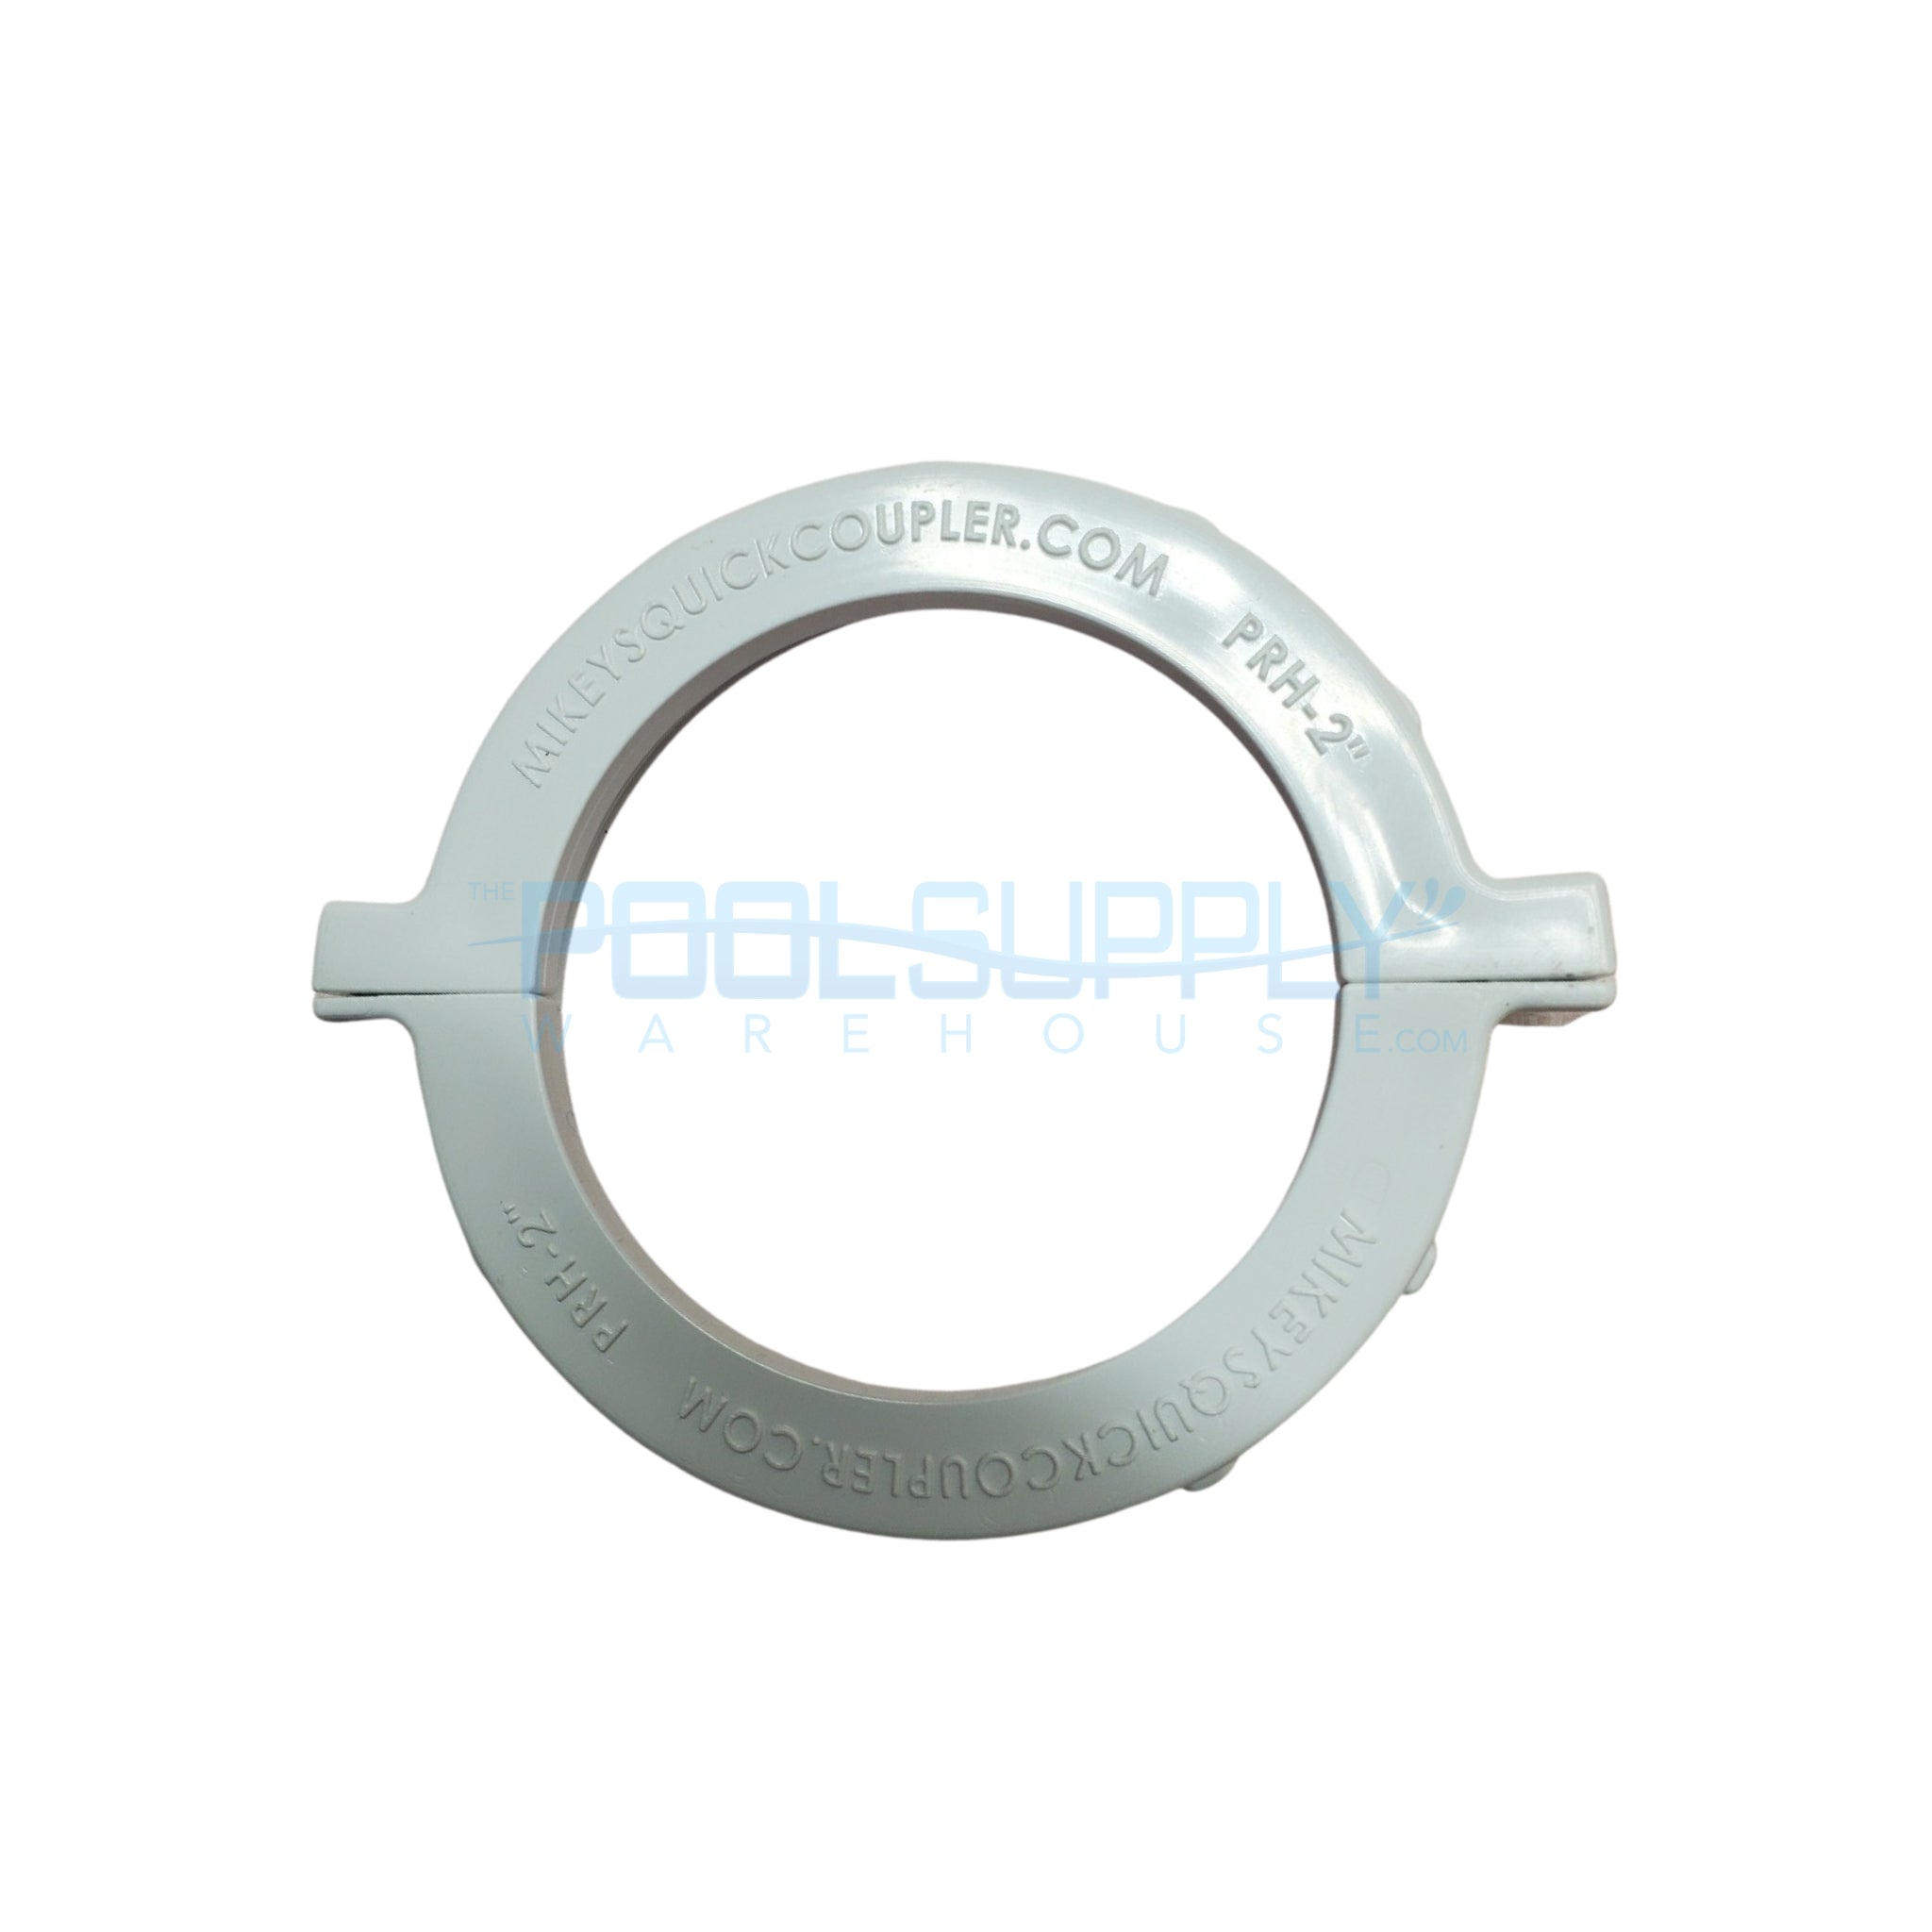 Mikeys Quick Coupler - PRH-2” - The Pool Supply Warehouse